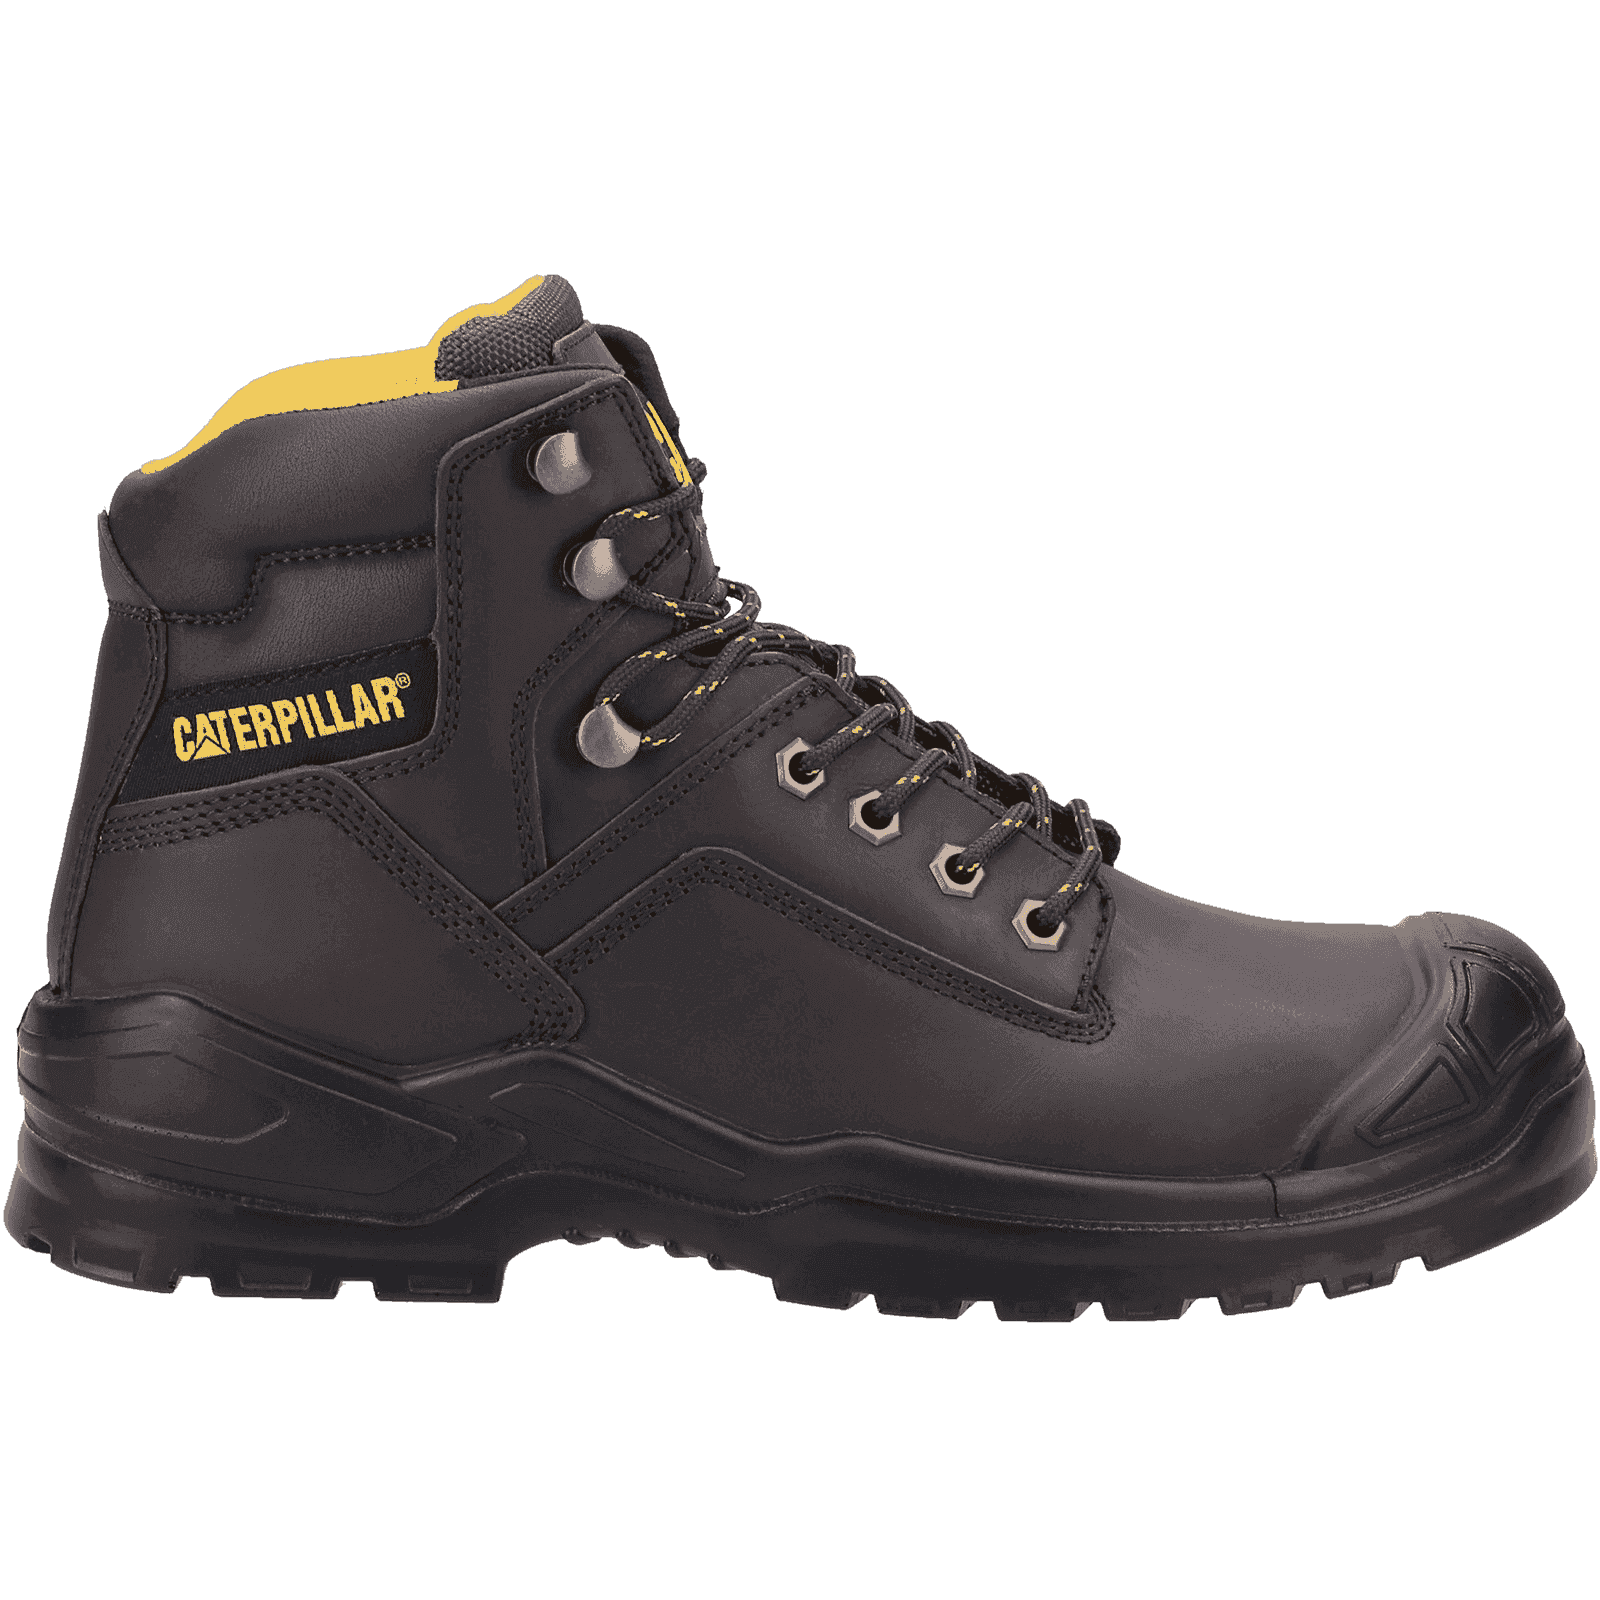 Striver Bump Cap Safety Boots CAT Brown